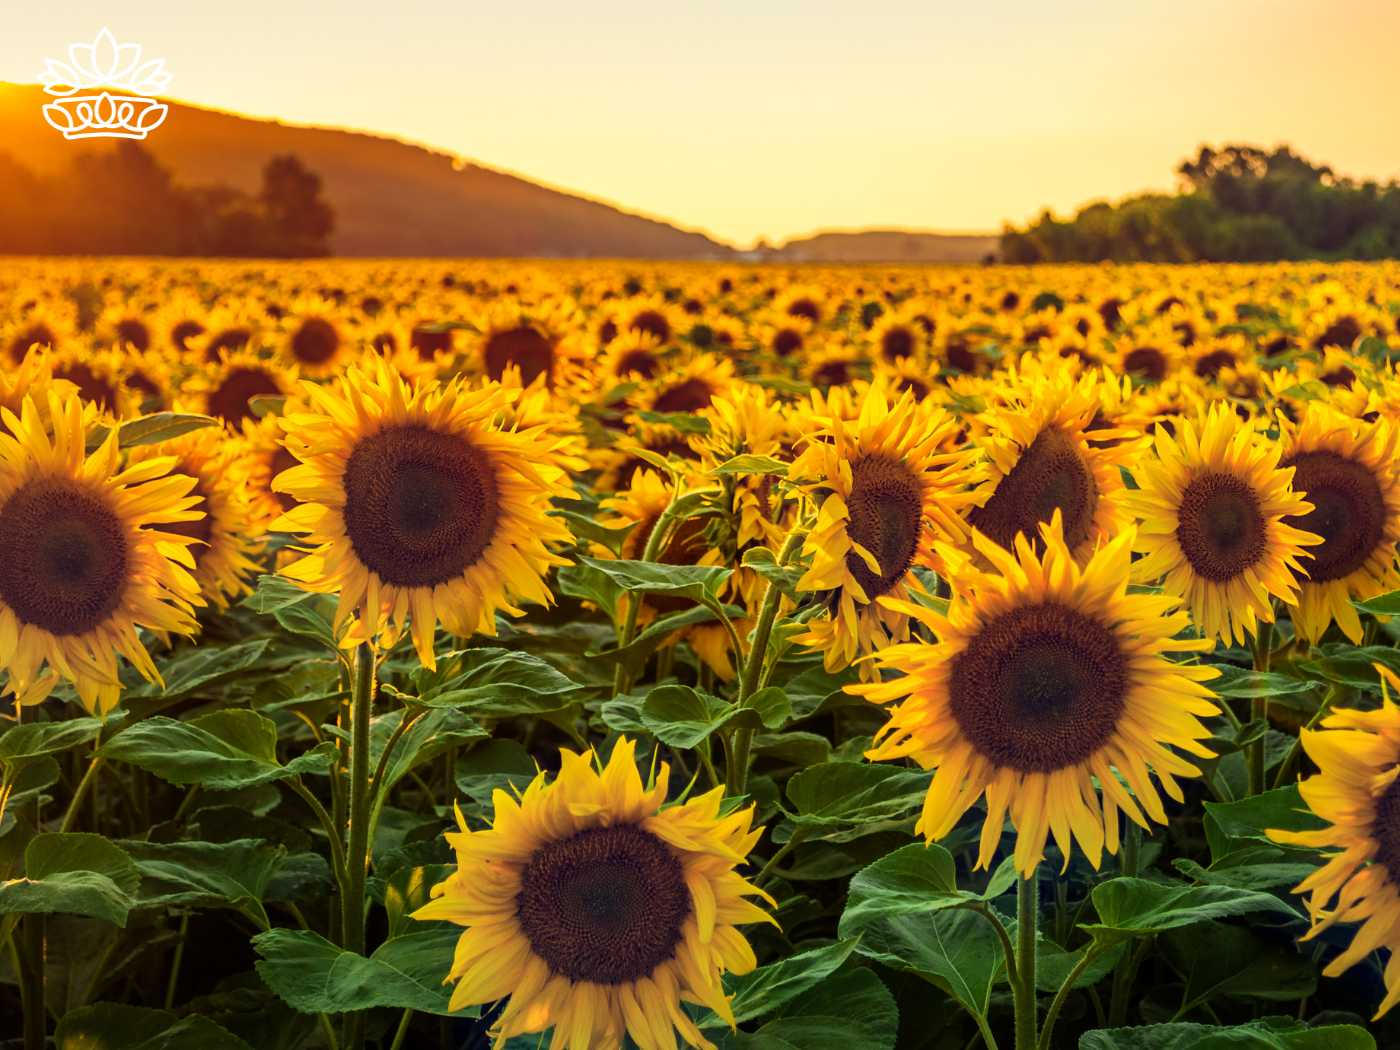 A breathtaking sunset illuminating a vast field of sunflowers, part of the Sunflowers Collection by Fabulous Flowers and Gifts. Find and enter this stunning scene to rate and send these fabulous sunflowers, capturing the essence of natural beauty.